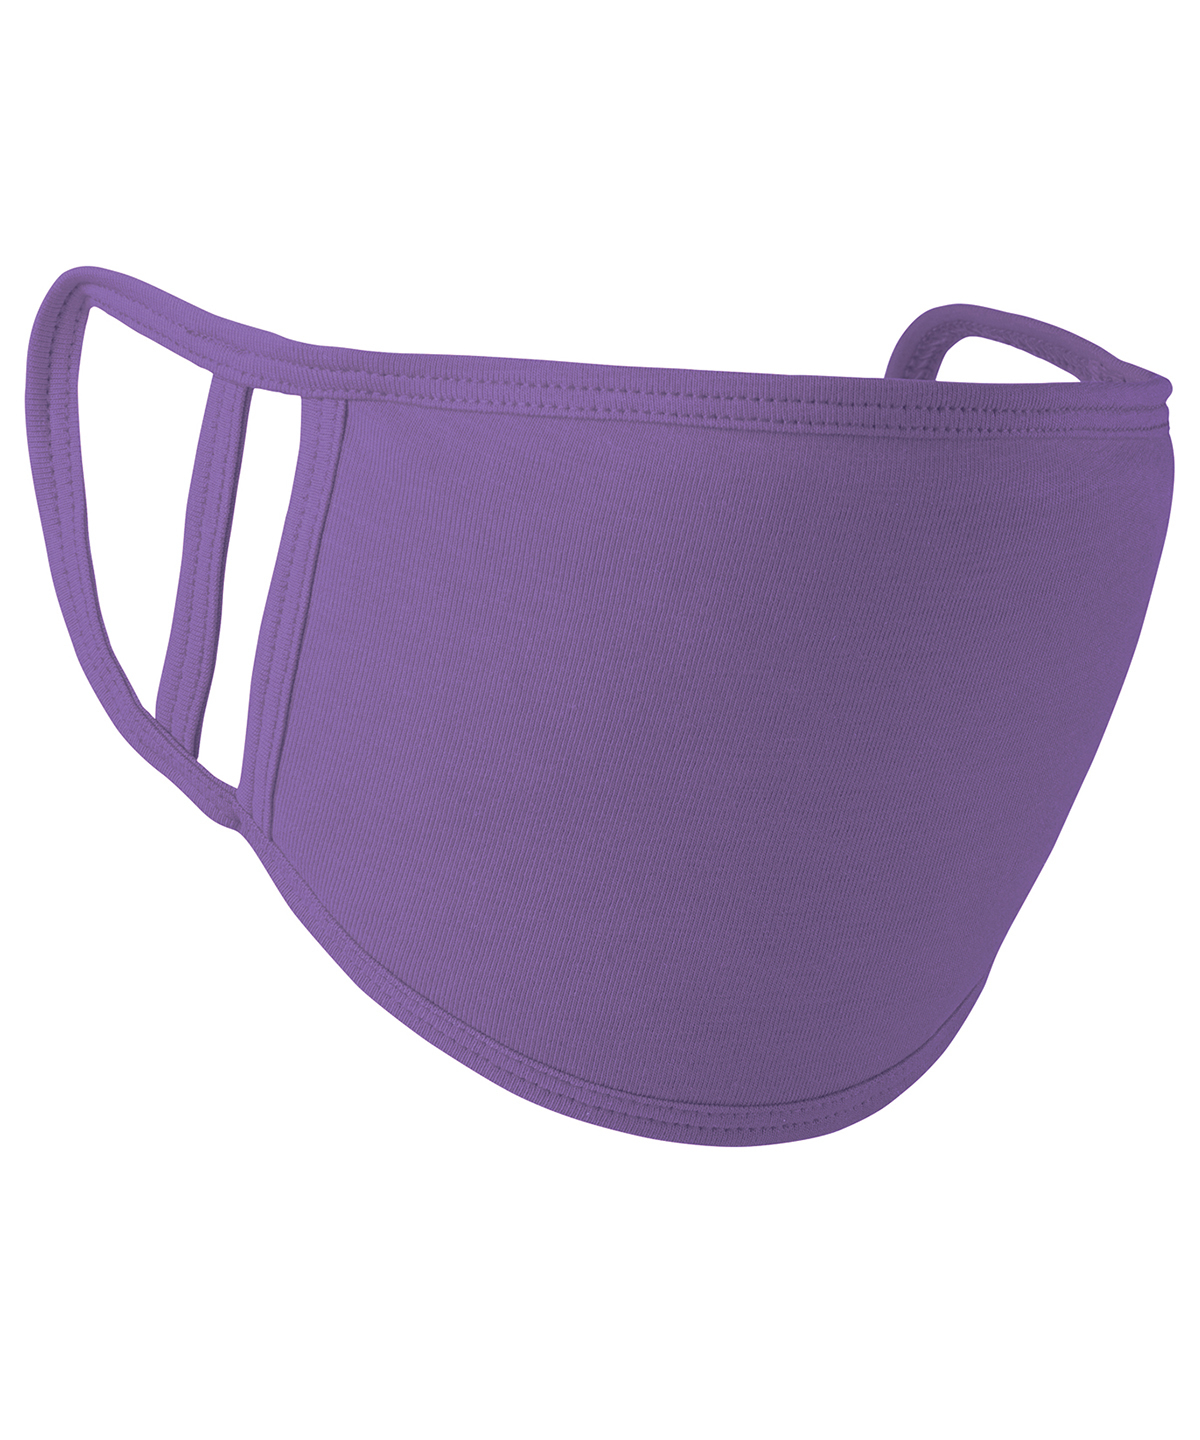 Washable 2-ply Face Covering in purple